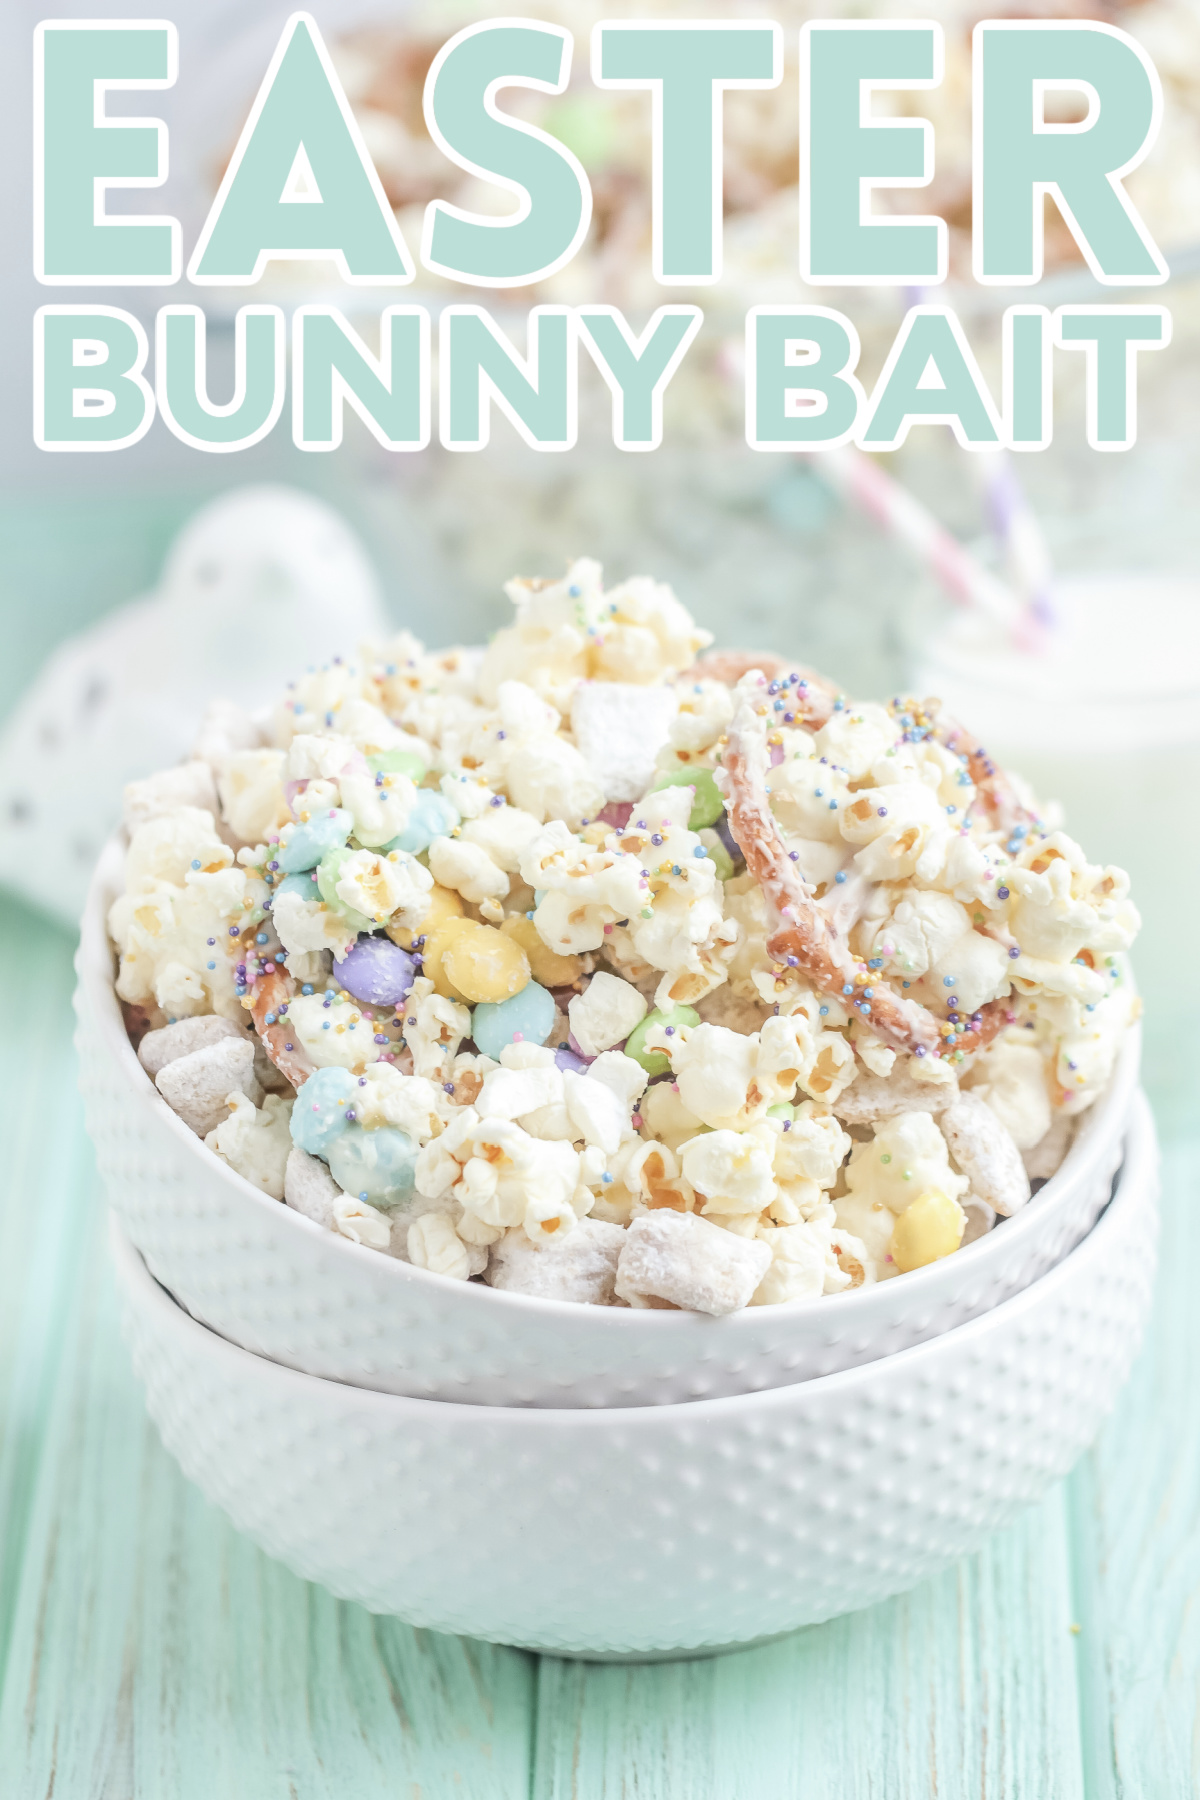 Make this Bunny Bait recipe this Easter, everyone will love this Easter snack mix featuring popcorn, muddy buddies, and loads of chocolate!